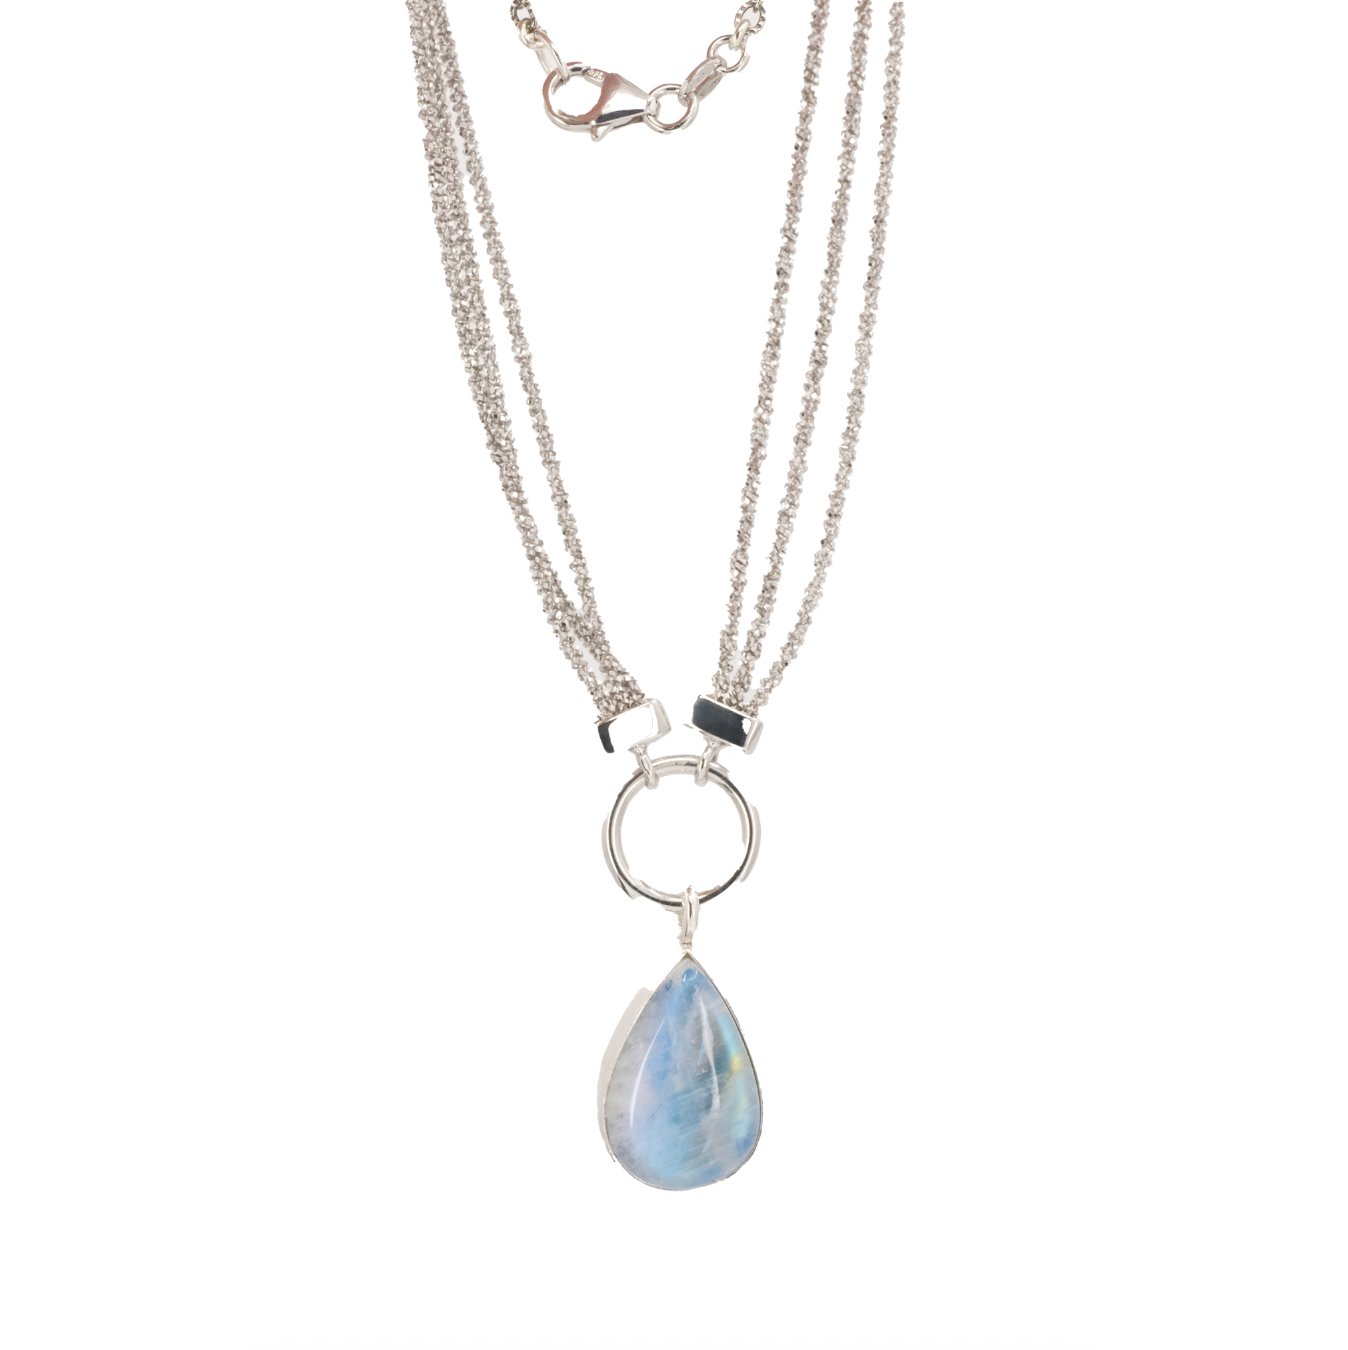 Moonstone + Sterling Malta Necklace - One of a Kind